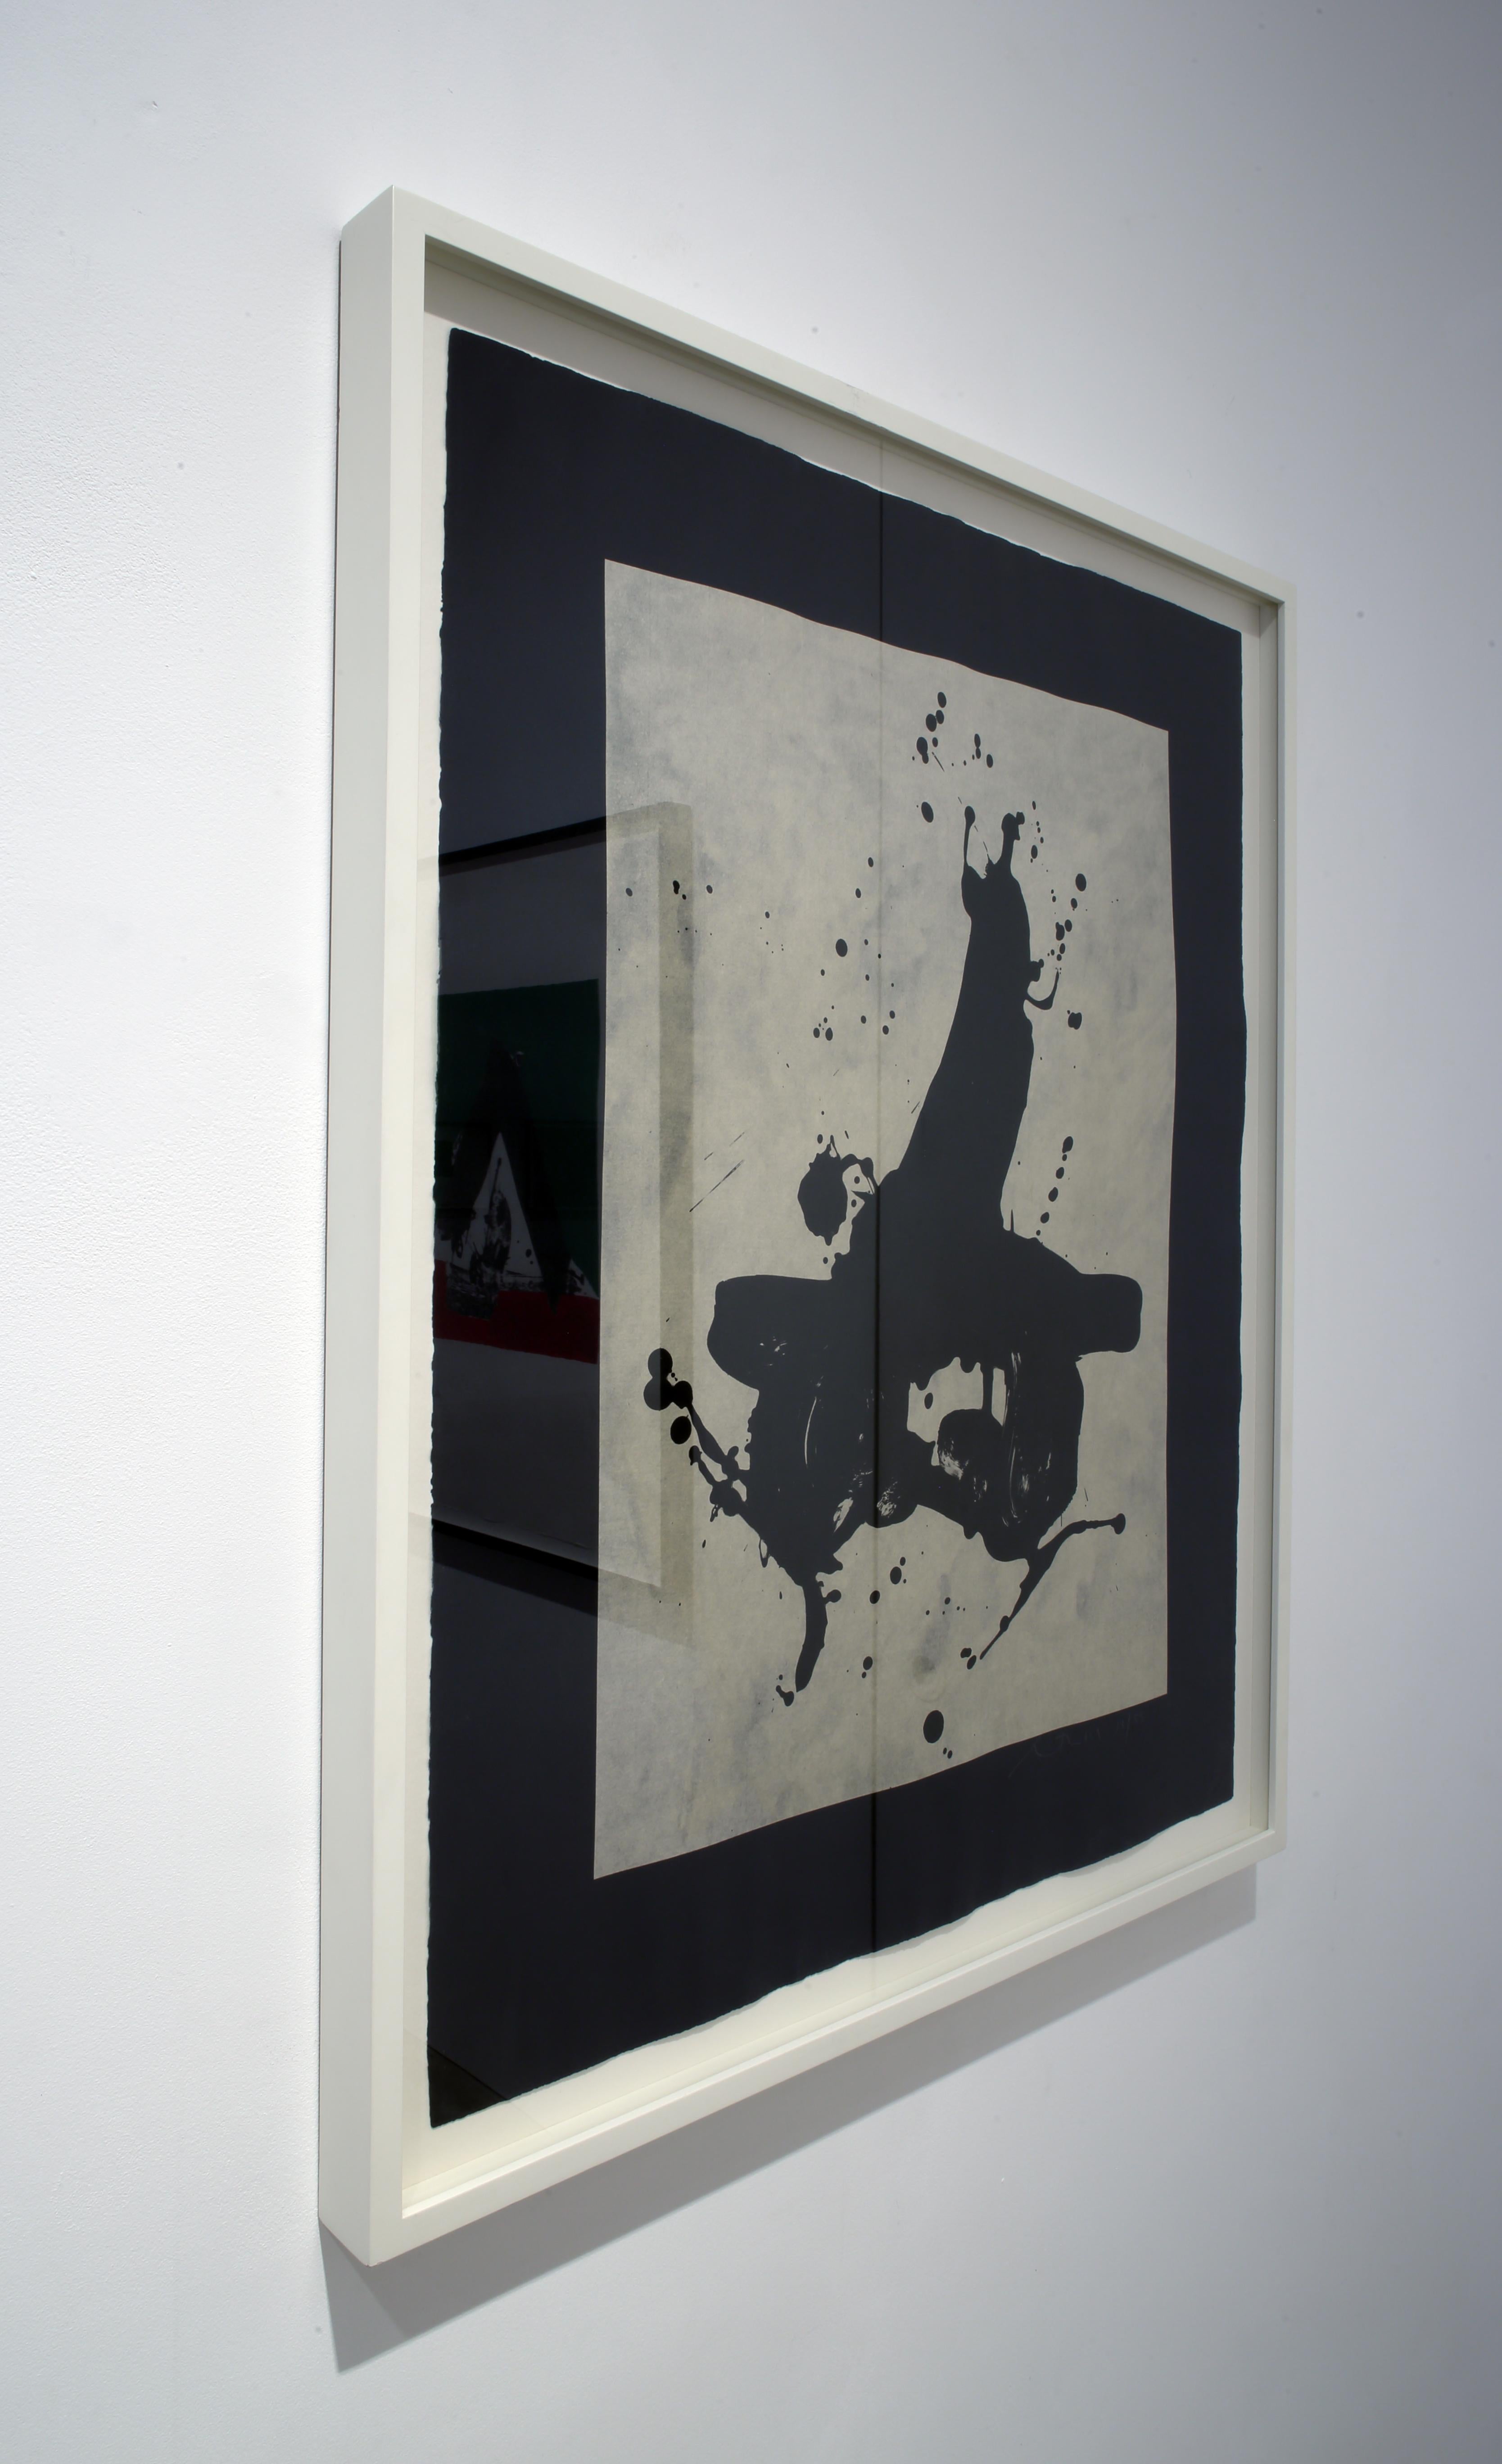 Black on Black - Abstract Expressionist Print by Robert Motherwell